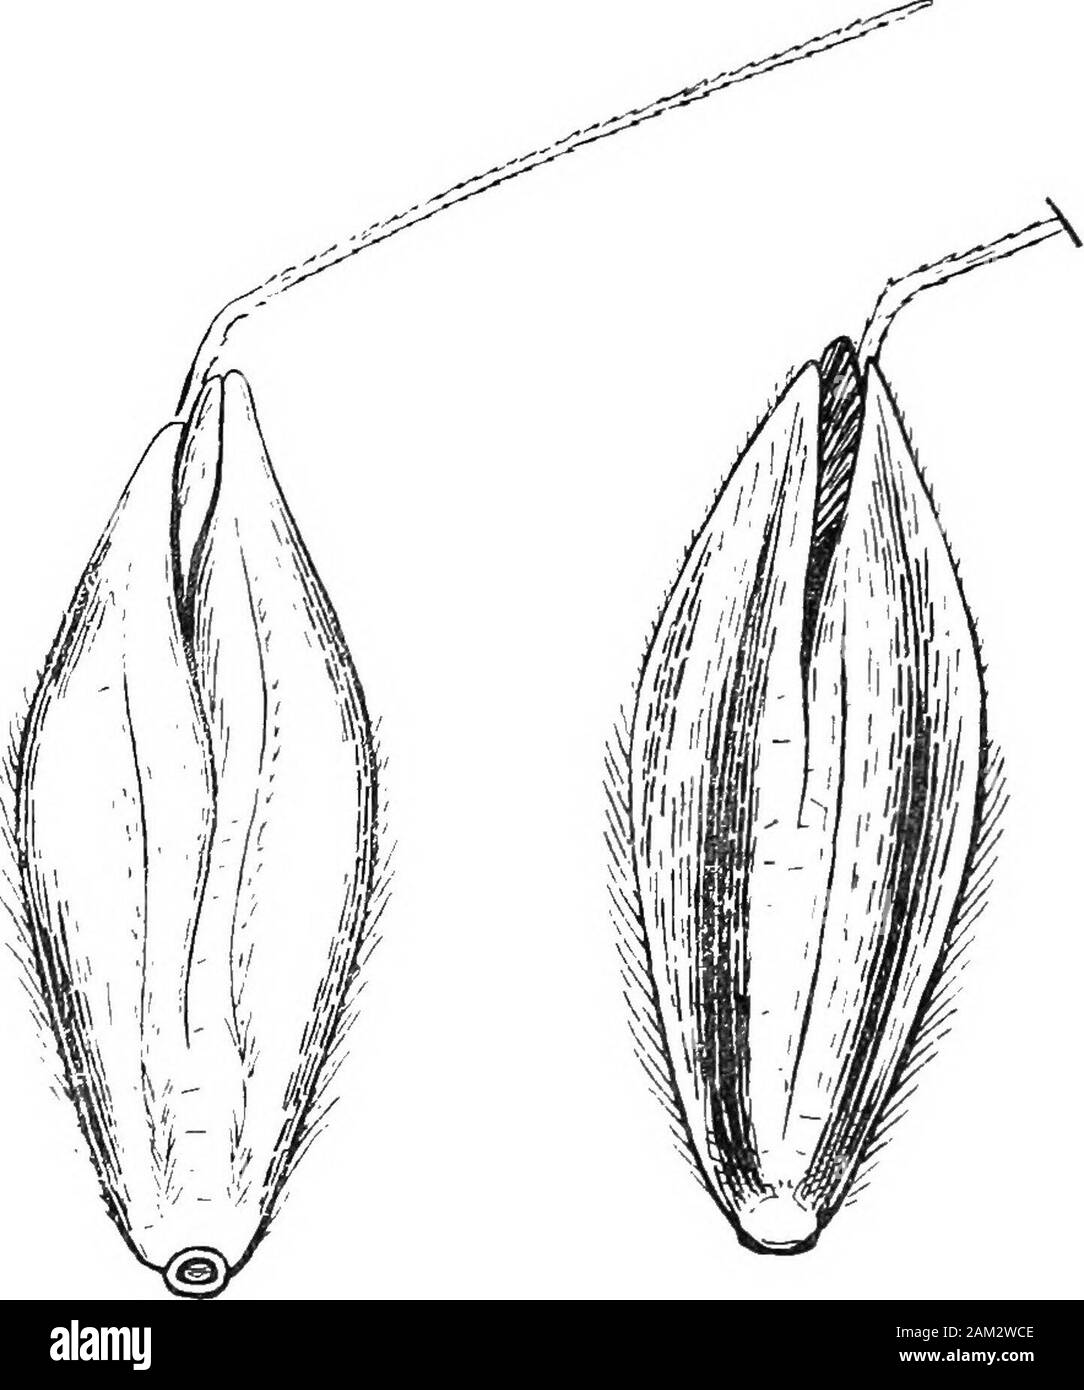 British grasses and their employment in agriculture . Fig. 47. Alopecurus agrestis. About  nat. size. unequal, membranous, and acute; the upper and larger glume isthree-nerved, and often of a purple colour; the lower glumehas a dorsal nerve only. The seeds of this species are often sooted or smutted owing to the attacks of Vstilago perennans,one of the smut fungi. The seeds consist of the spikelets minus the empty glumes; A. 5 66 Botanical Section [PT I r their length without the awn varies from 6-10 mm. The outerpalea of the lower flower bears a long (10 mm. or more) twistedand kneed dorsal Stock Photo